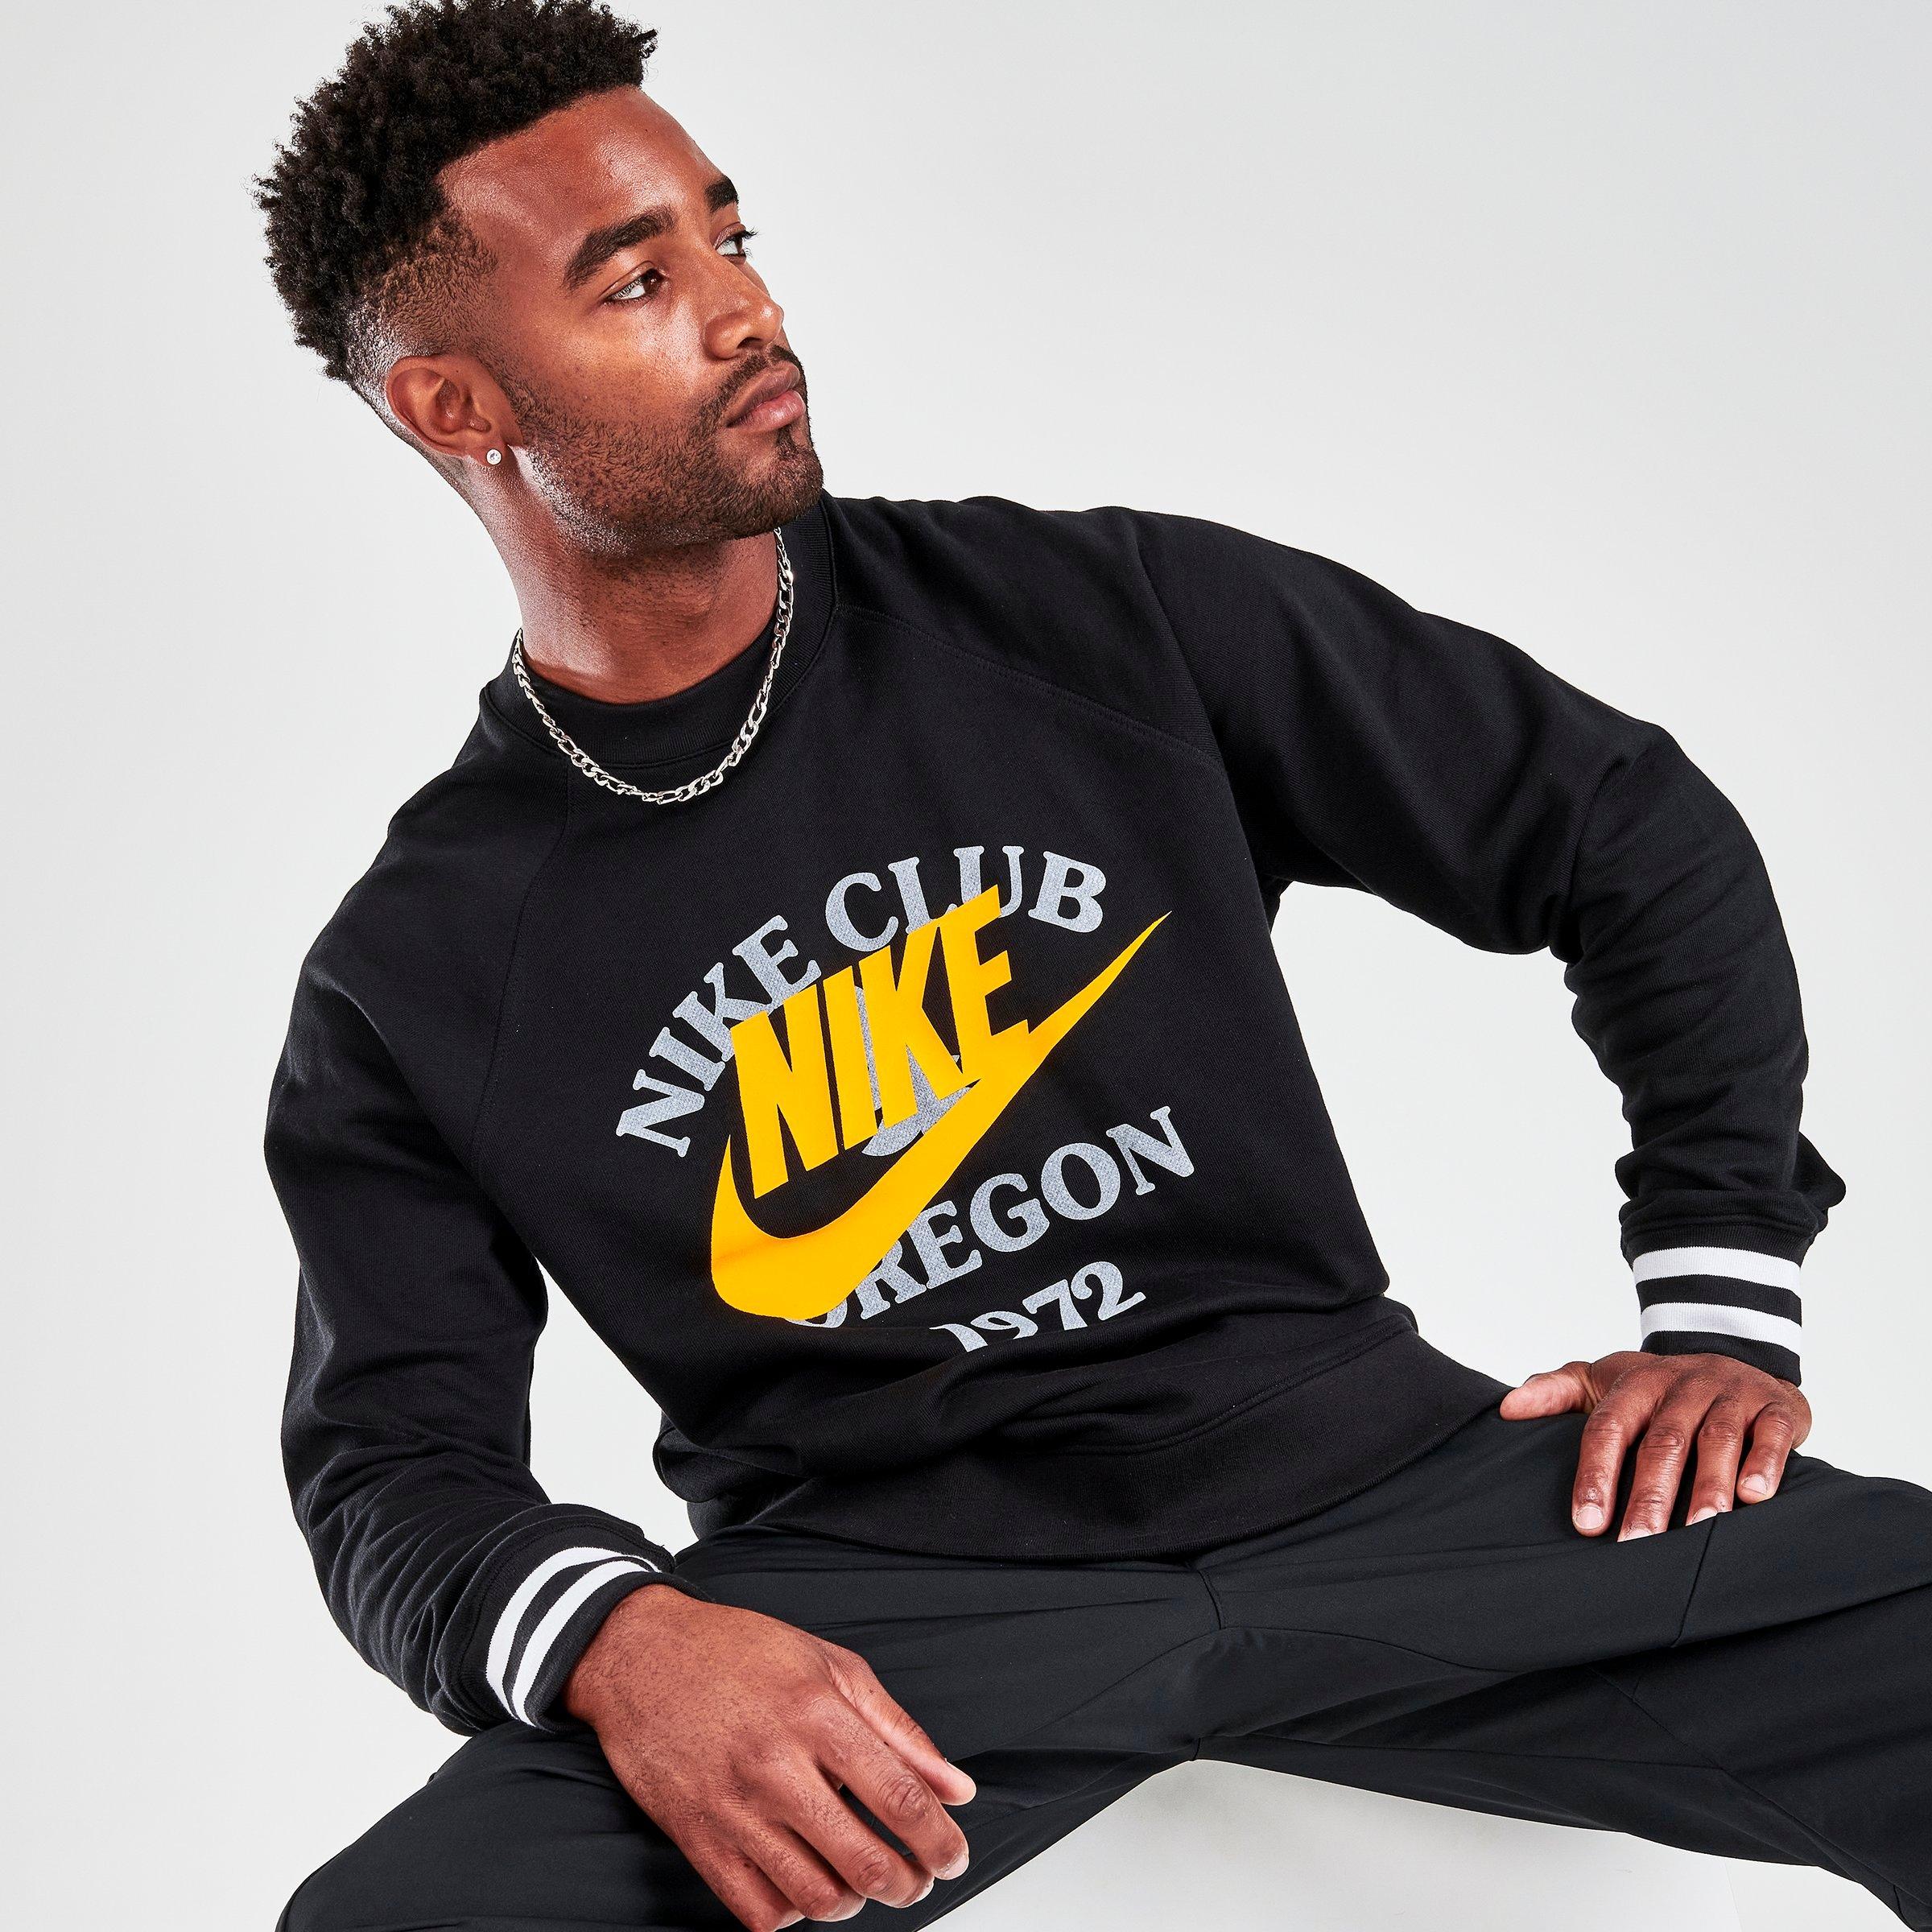 UPC 195239015021 product image for Nike Men's Sportswear Stacked Prints French Terry Crewneck Sweatshirt in Black/B | upcitemdb.com